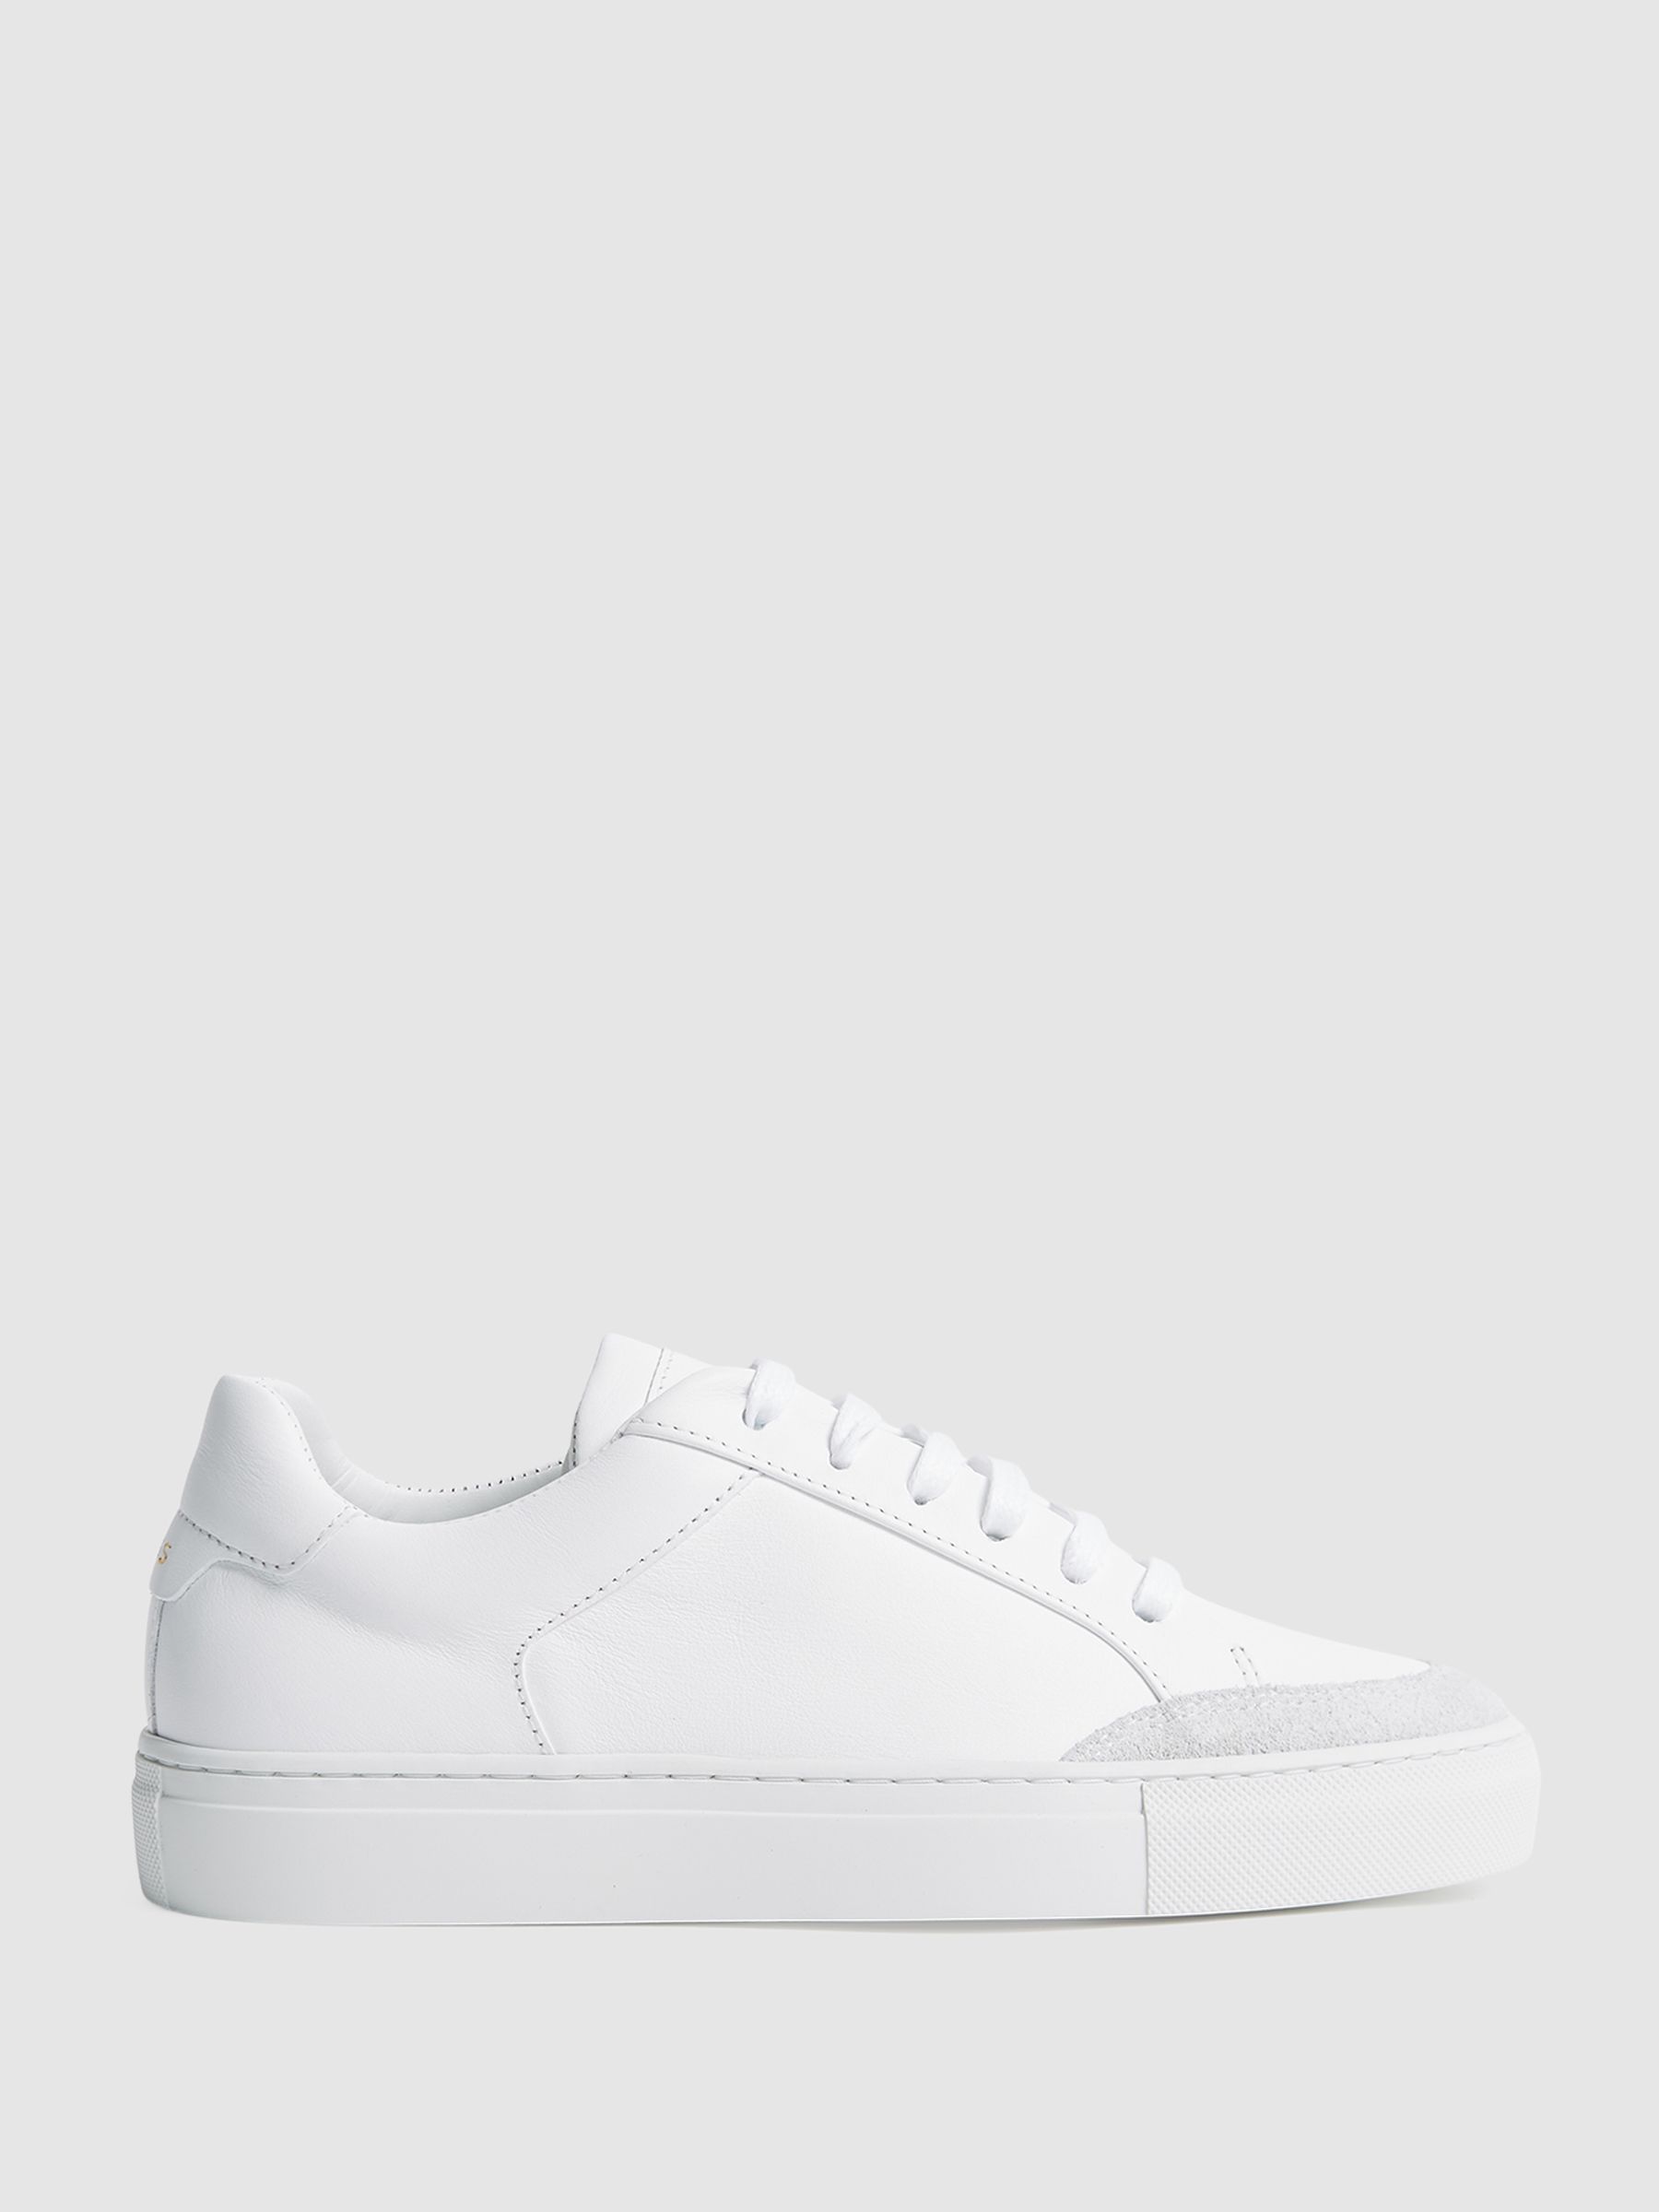 Reiss Ashley Leather Low Top Trainers - REISS